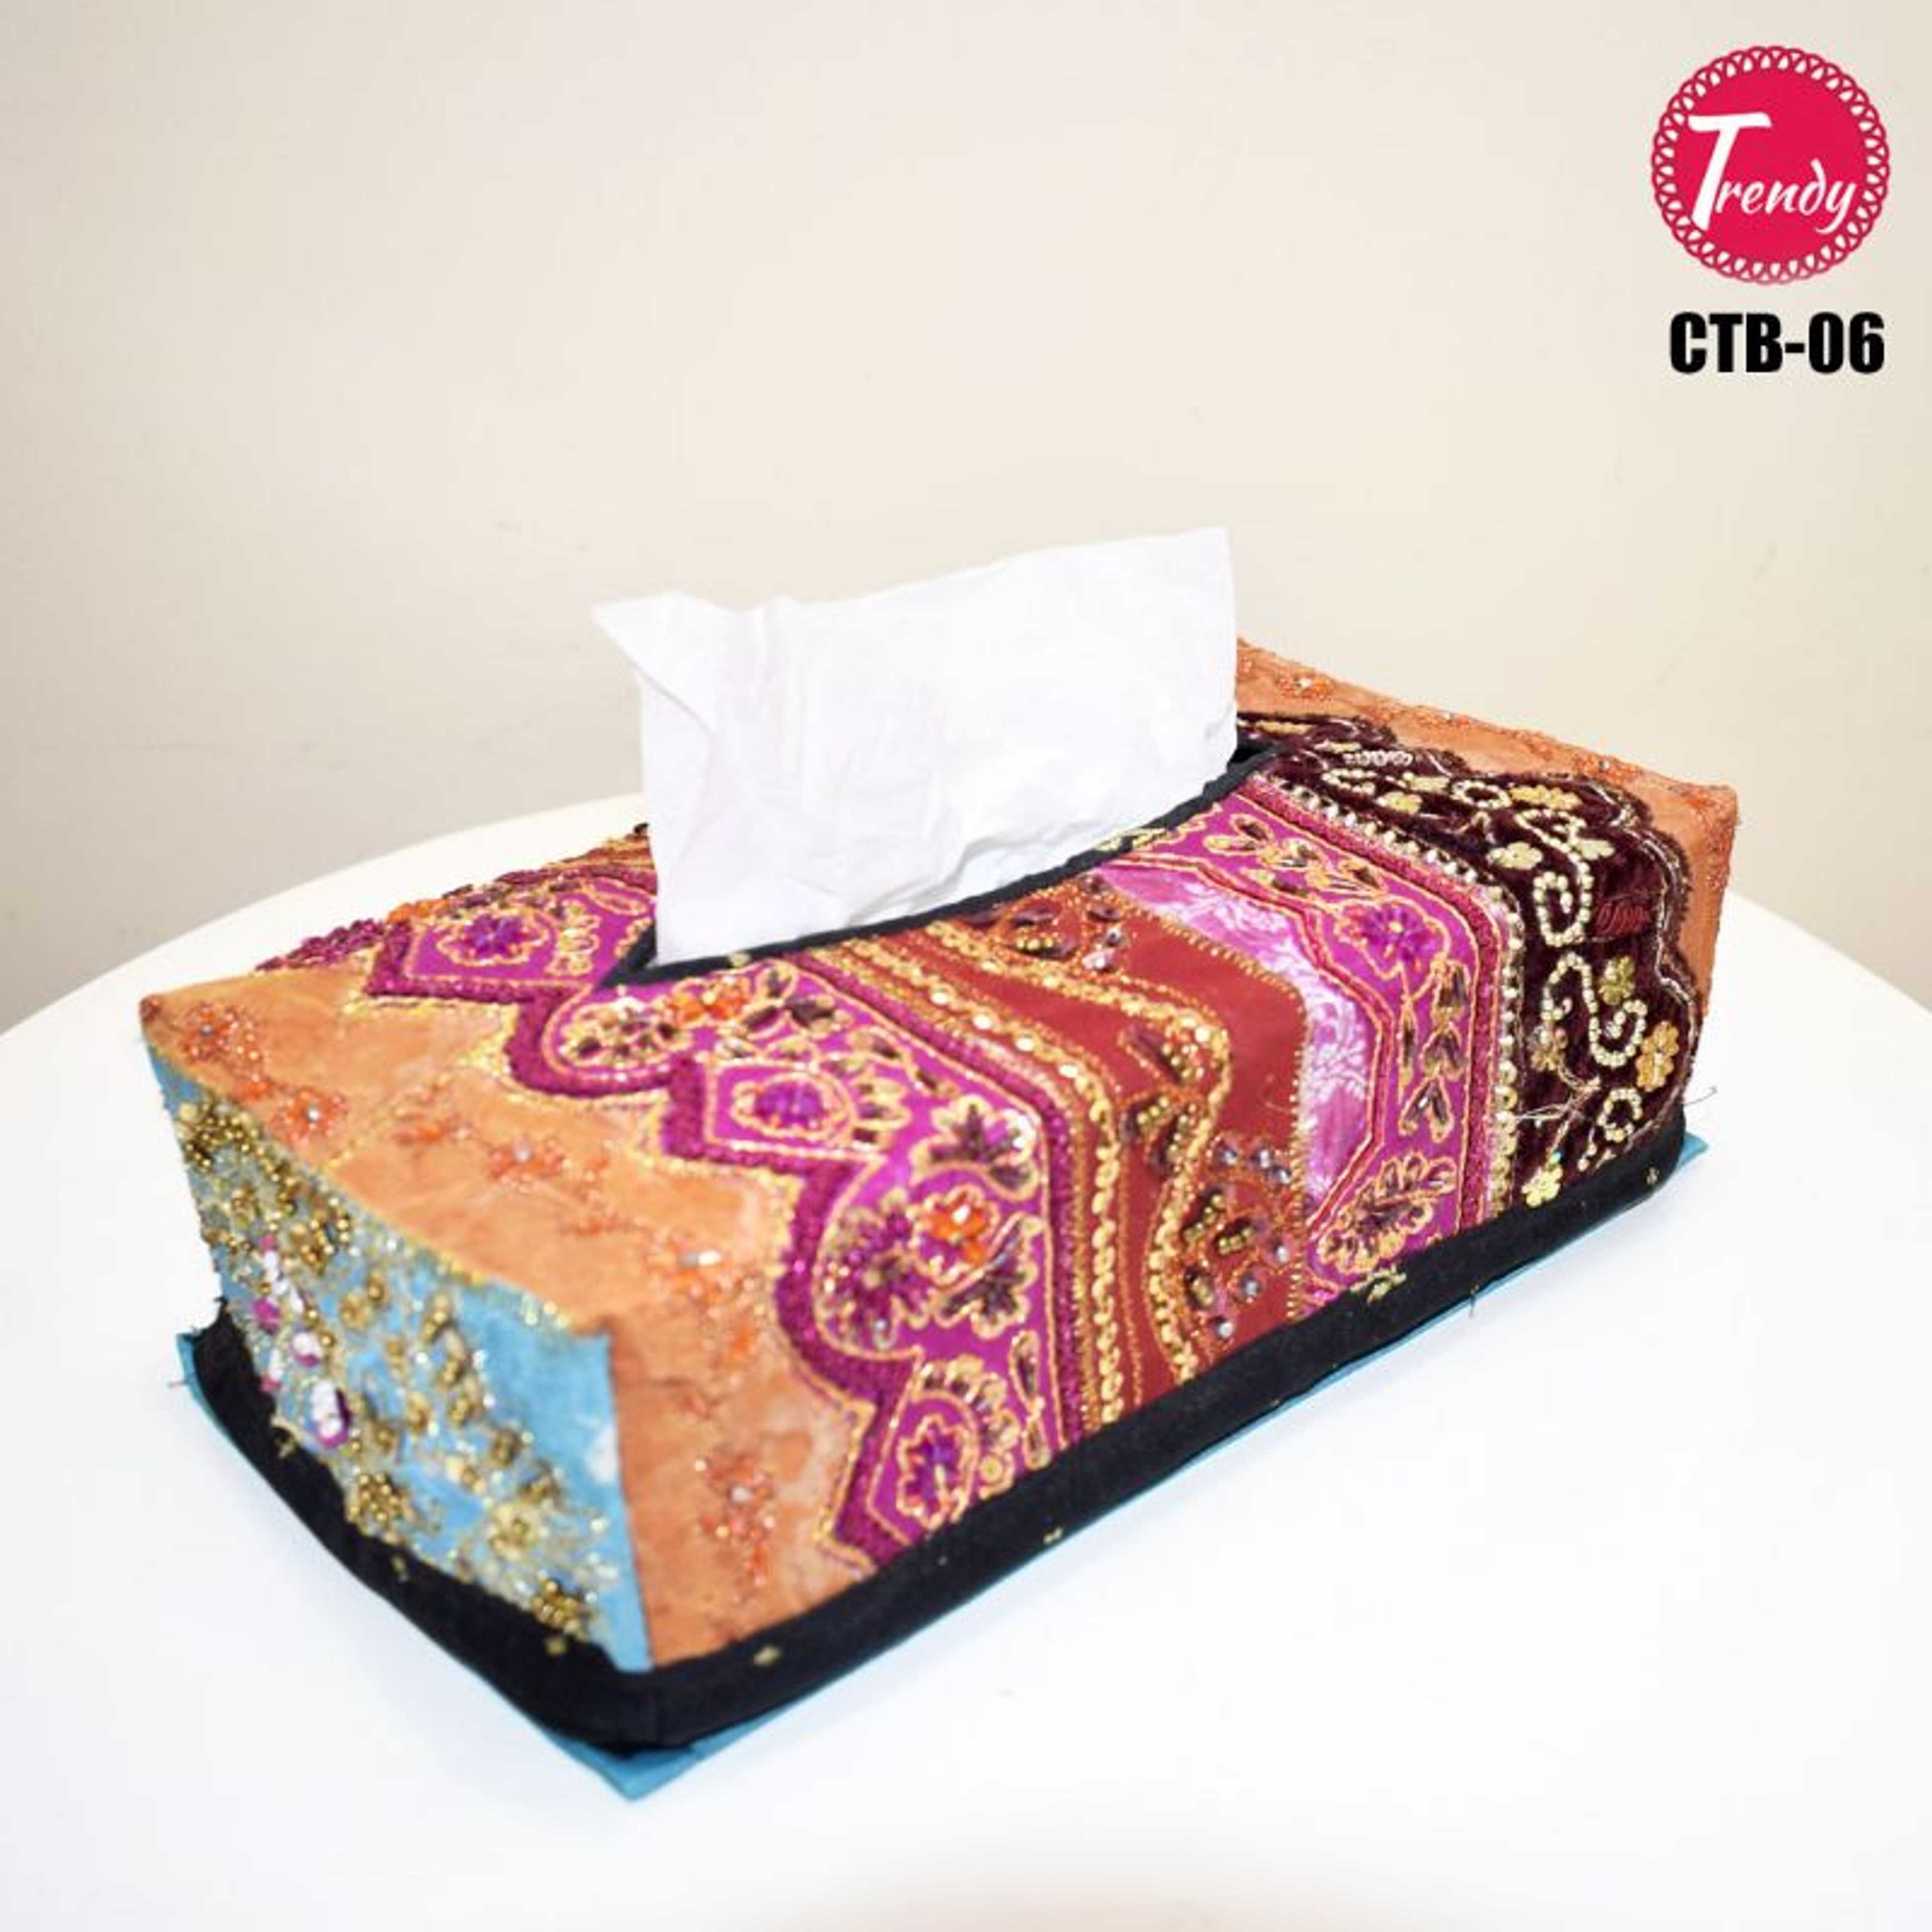 Sindhi Hand Embroidery Fabric Tissue Box Cover CTB-06